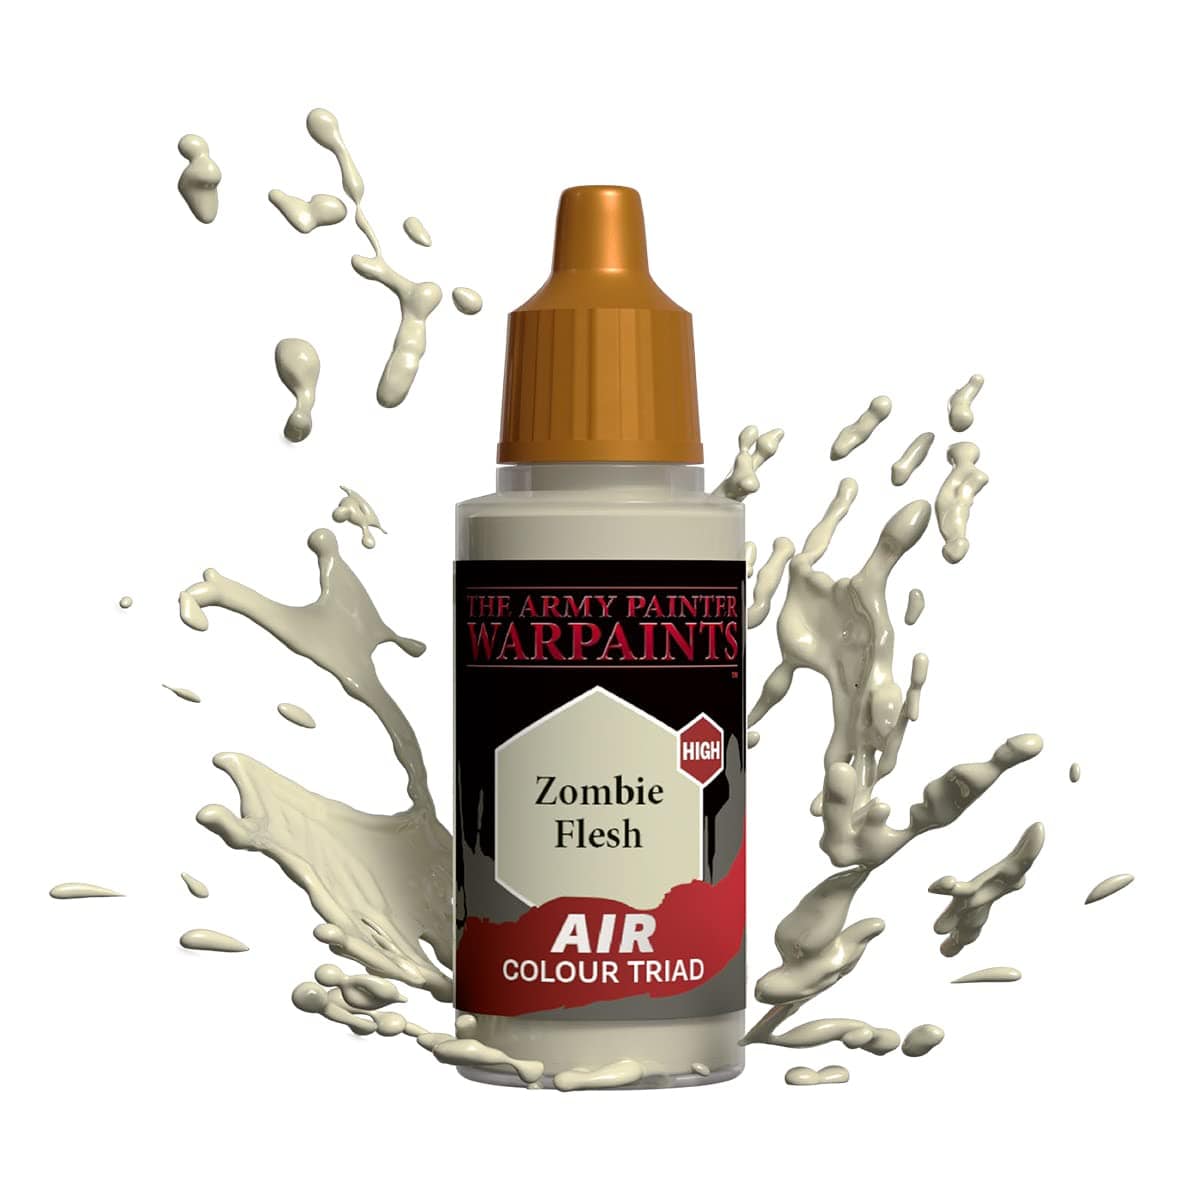 The Army Painter Warpaints Air: Zombie Flesh 18ml - Lost City Toys